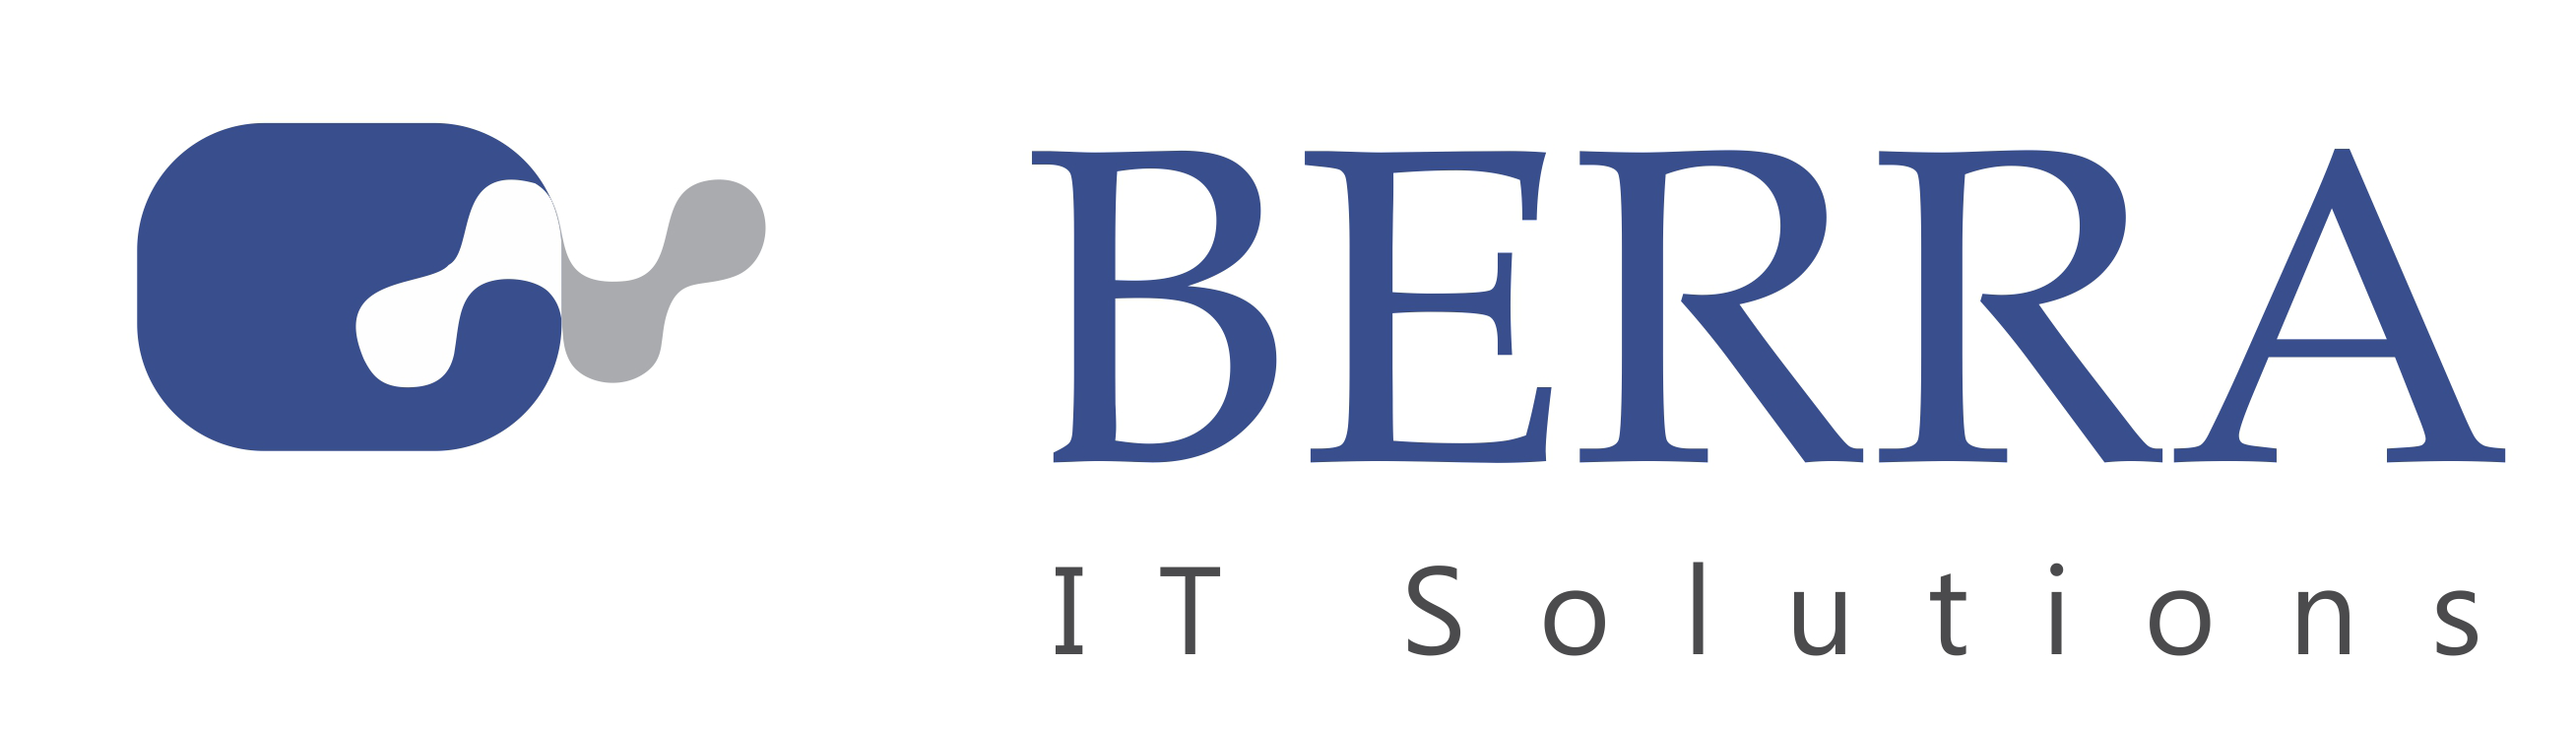 BERRA IT SOLUTIONS profile on Qualified.One